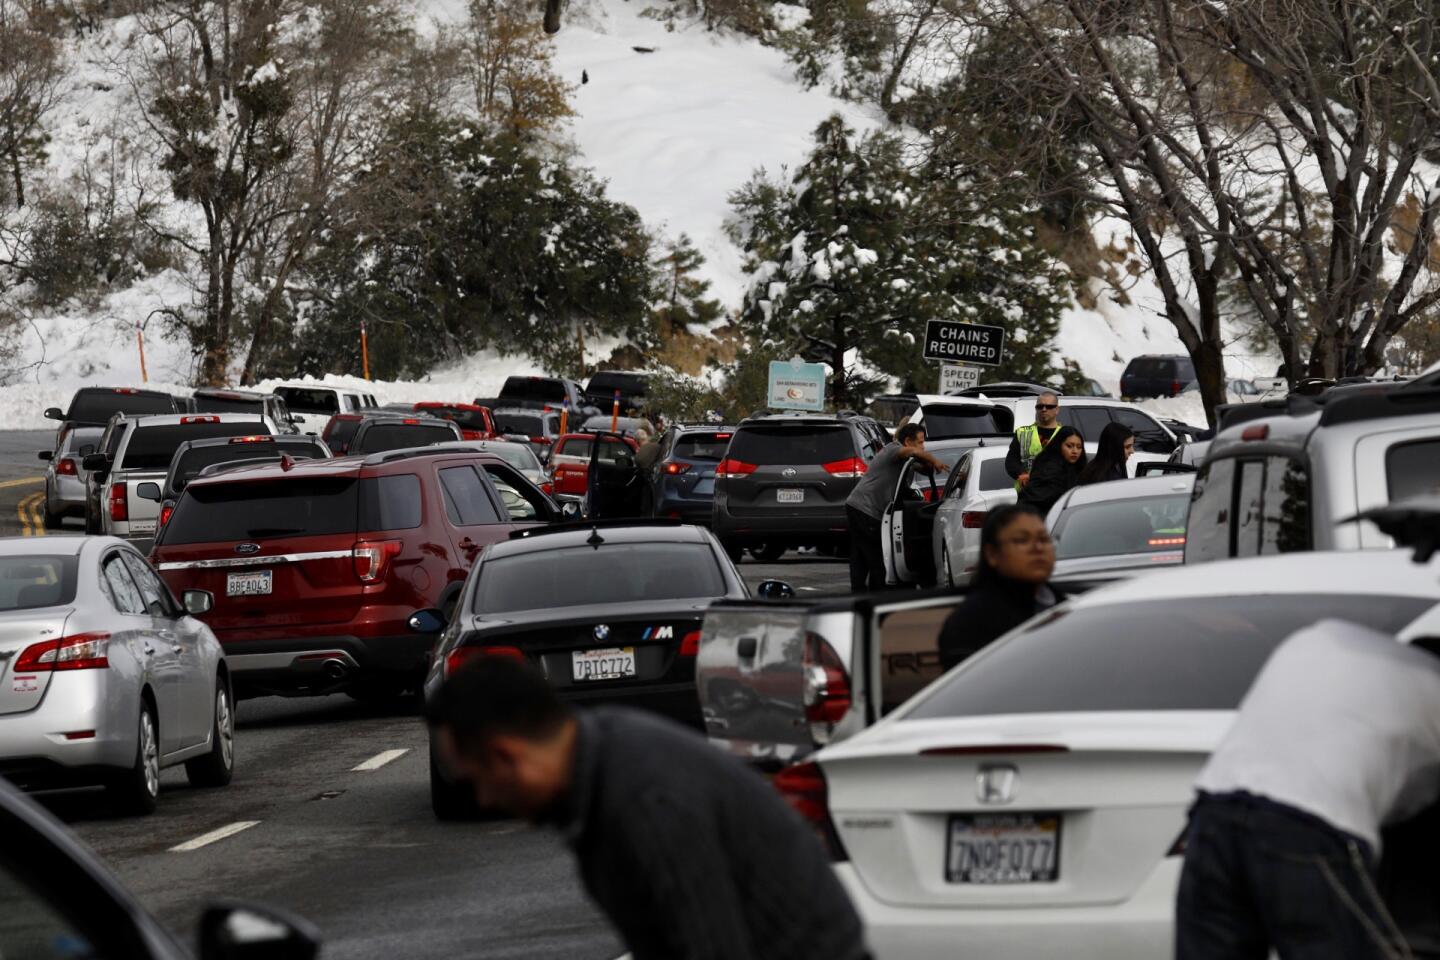 Gridlock on route 330 towards Big Bear as drivers pull over to put on chains at the CalTrans check point due to icy road conditions.